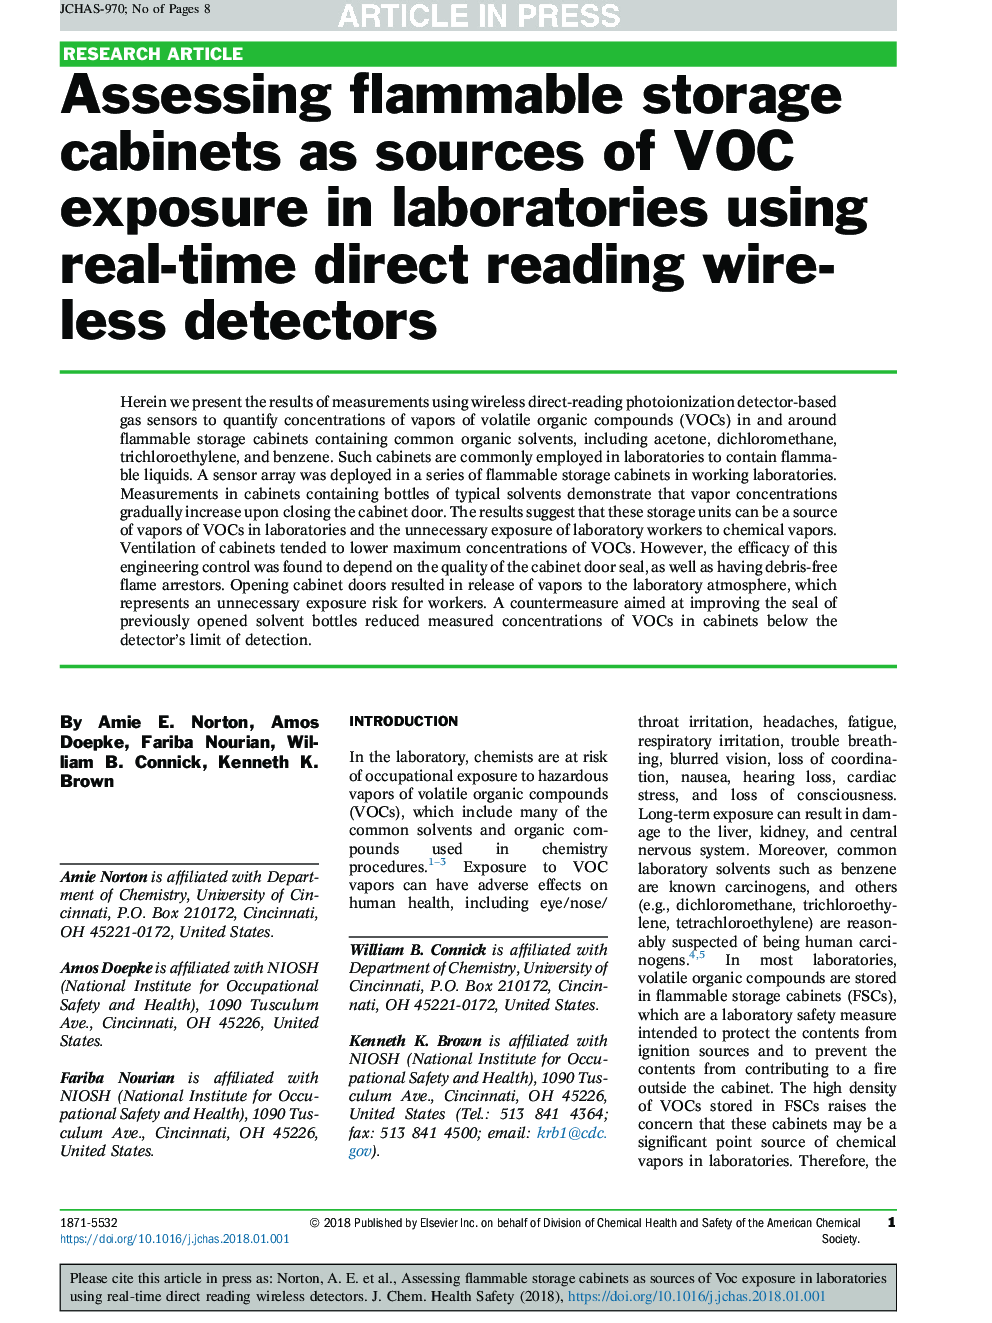 Assessing flammable storage cabinets as sources of VOC exposure in laboratories using real-time direct reading wireless detectors